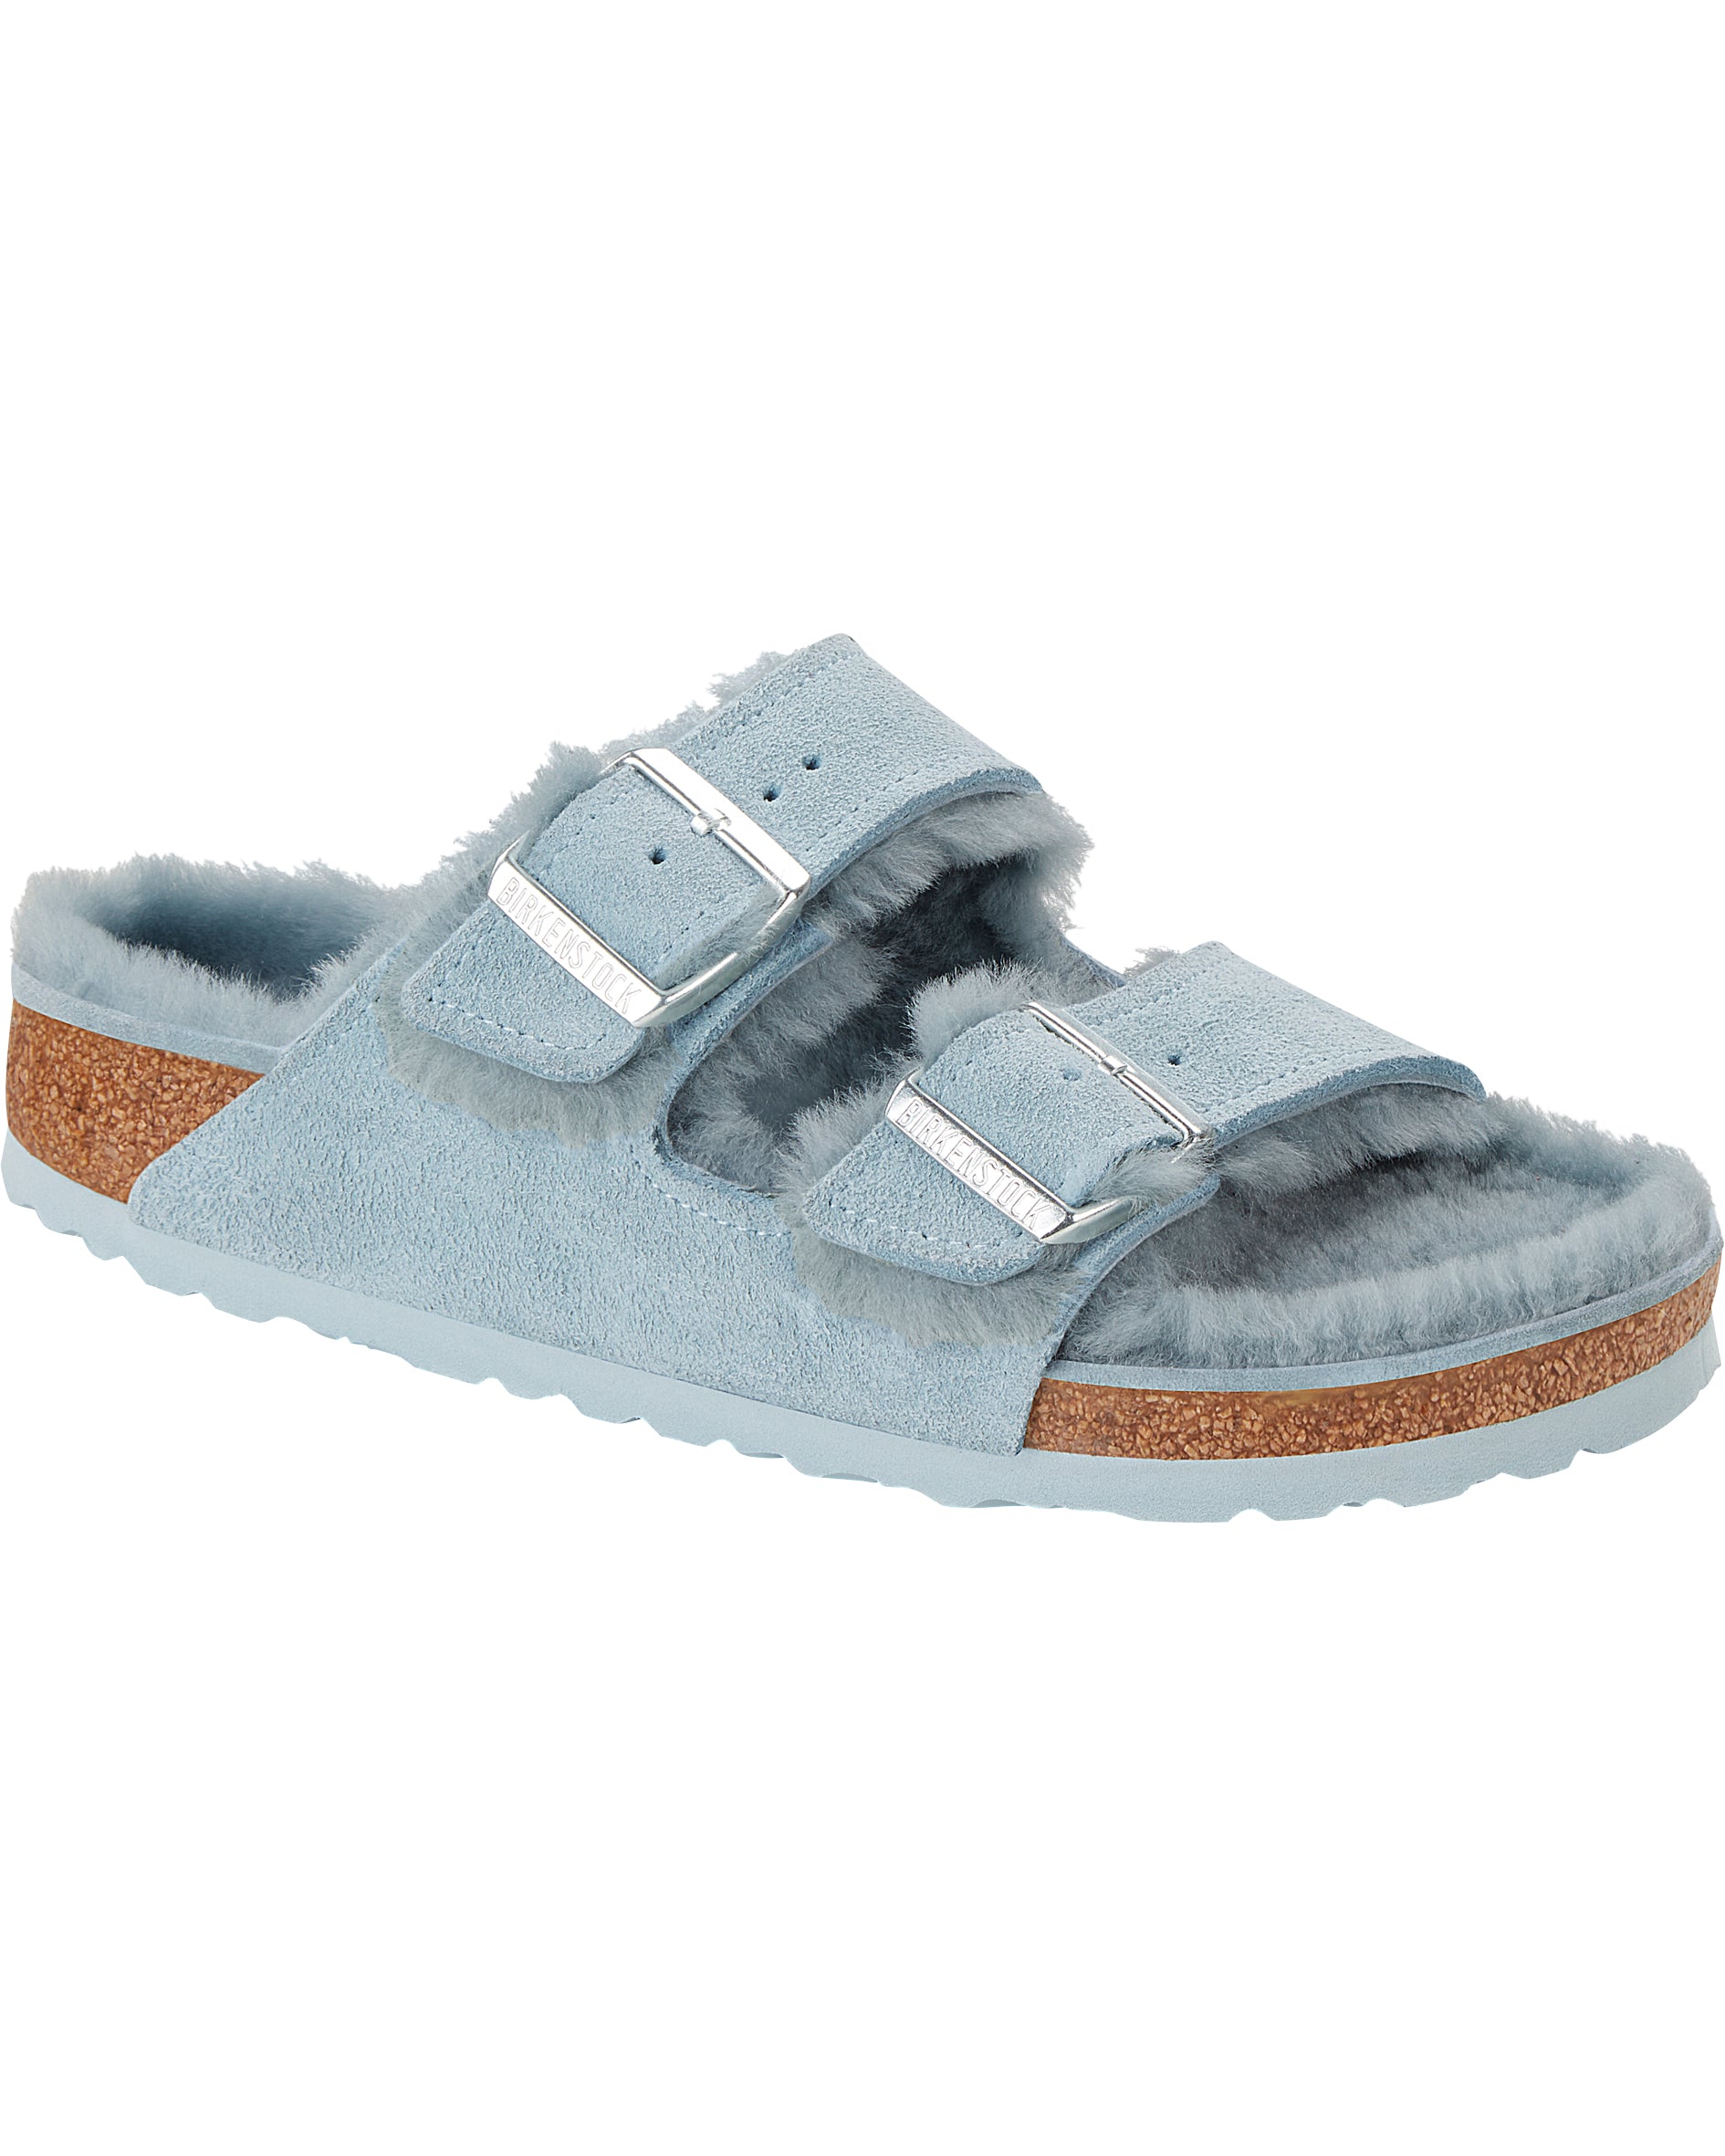 Arizona Shearling Light Blue Suede Leather Sandals